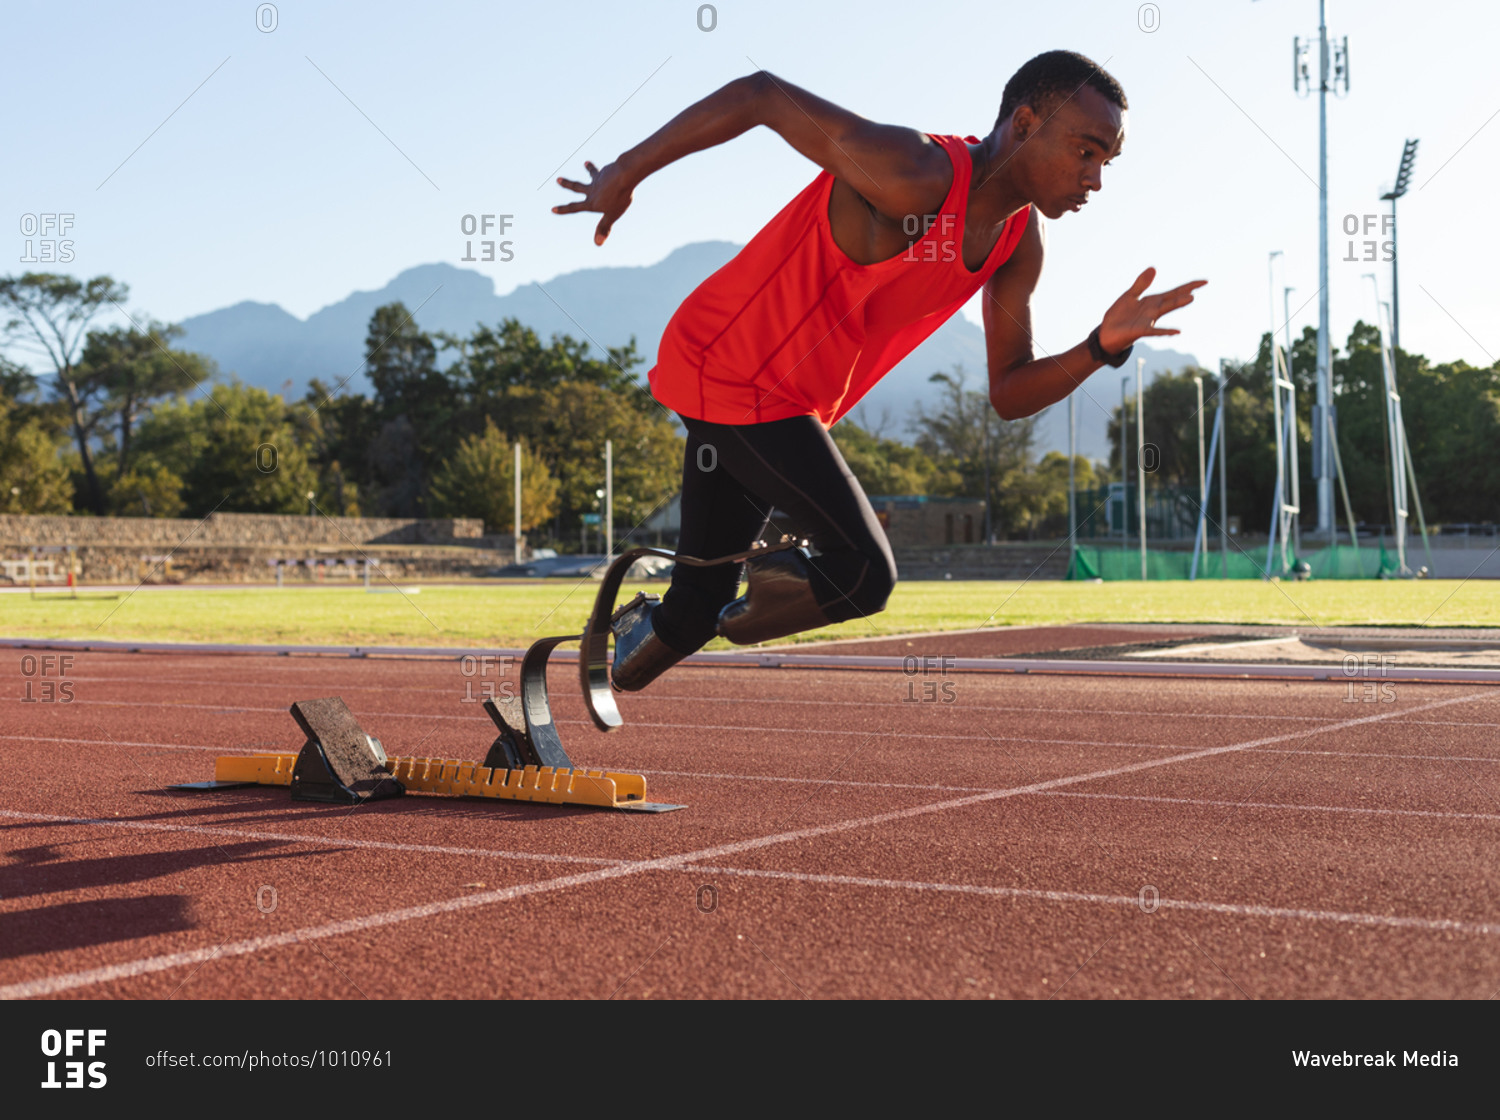 Fit, mixed race disabled male athlete at an outdoor sports stadium, starting sprint from starting blocks on race track wearing running blades. Disability athletics sport training.